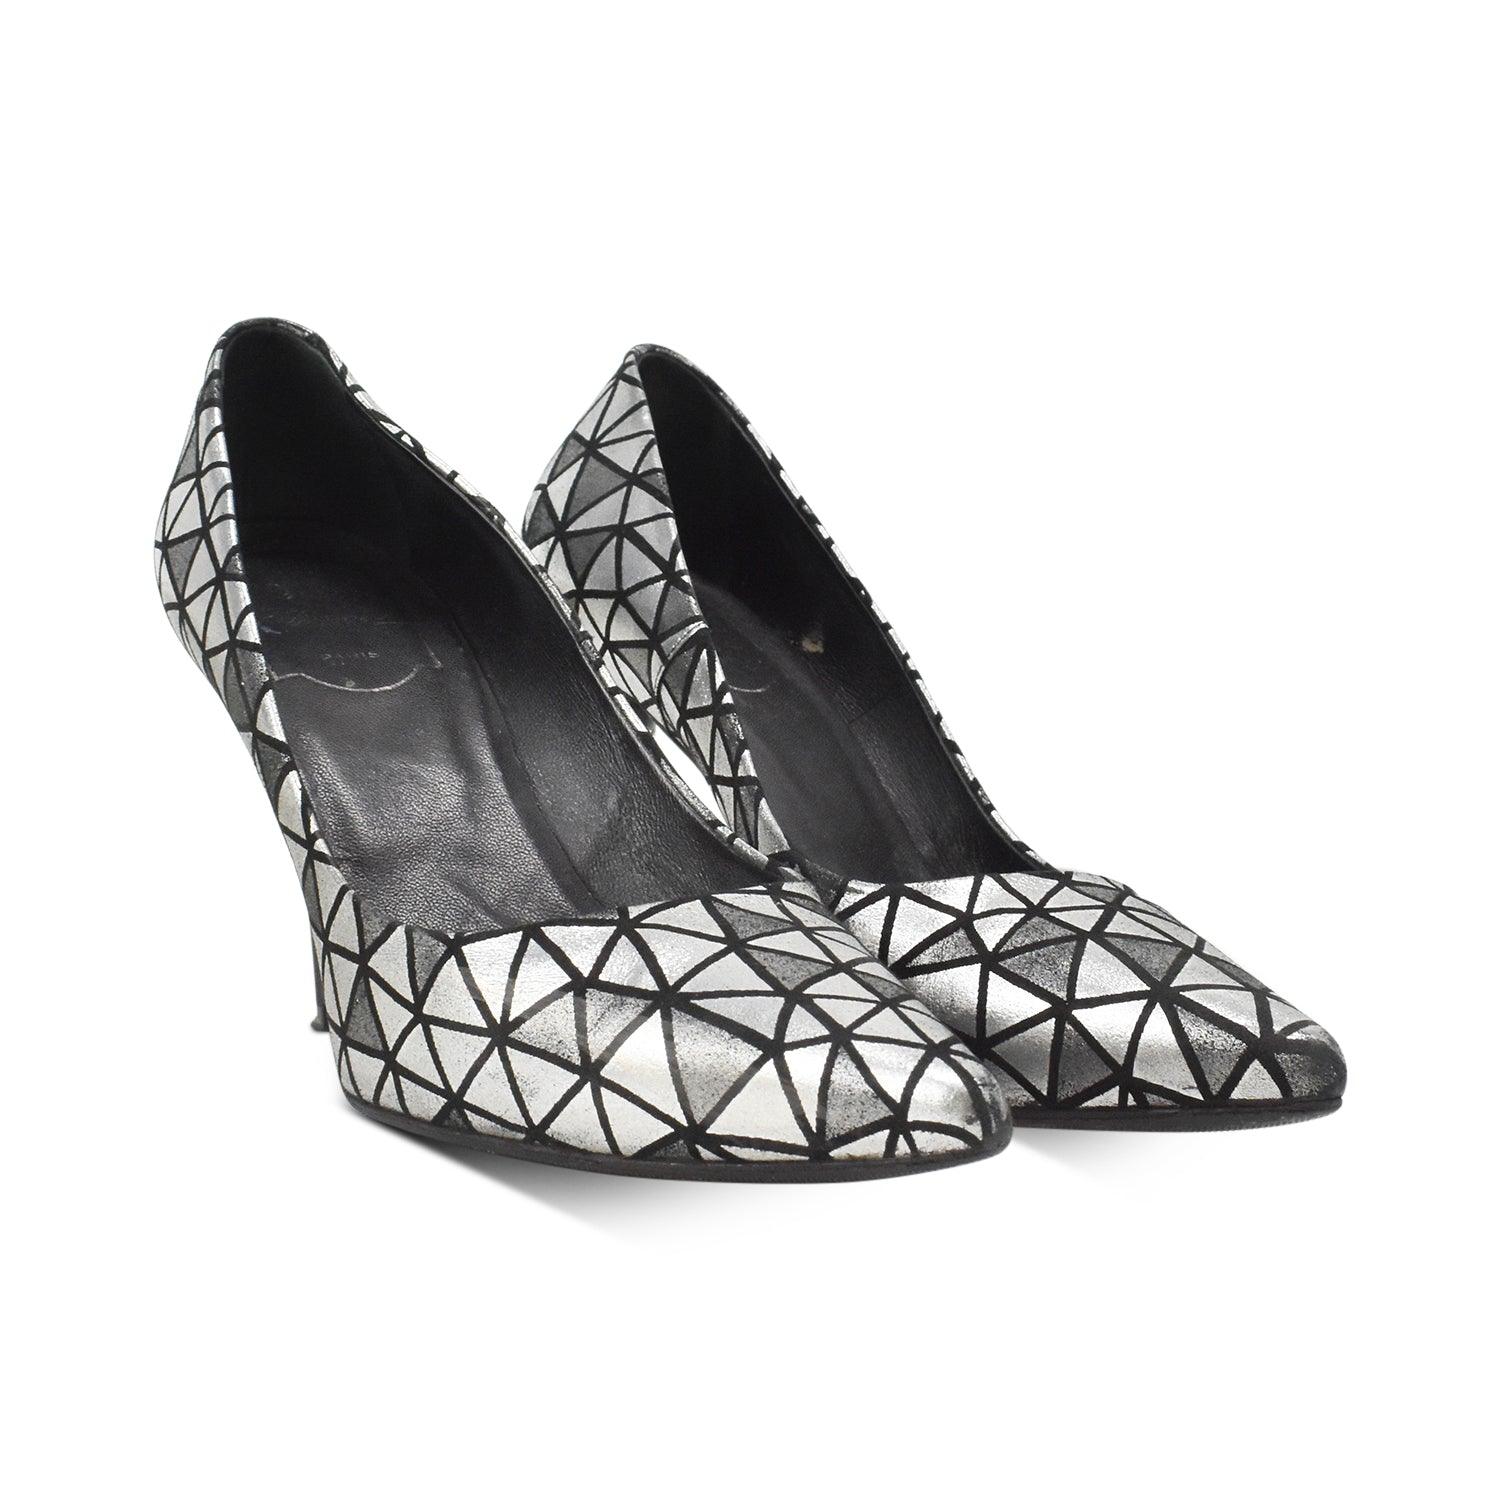 Roger Vivier Heels - Women's 35.5 - Fashionably Yours